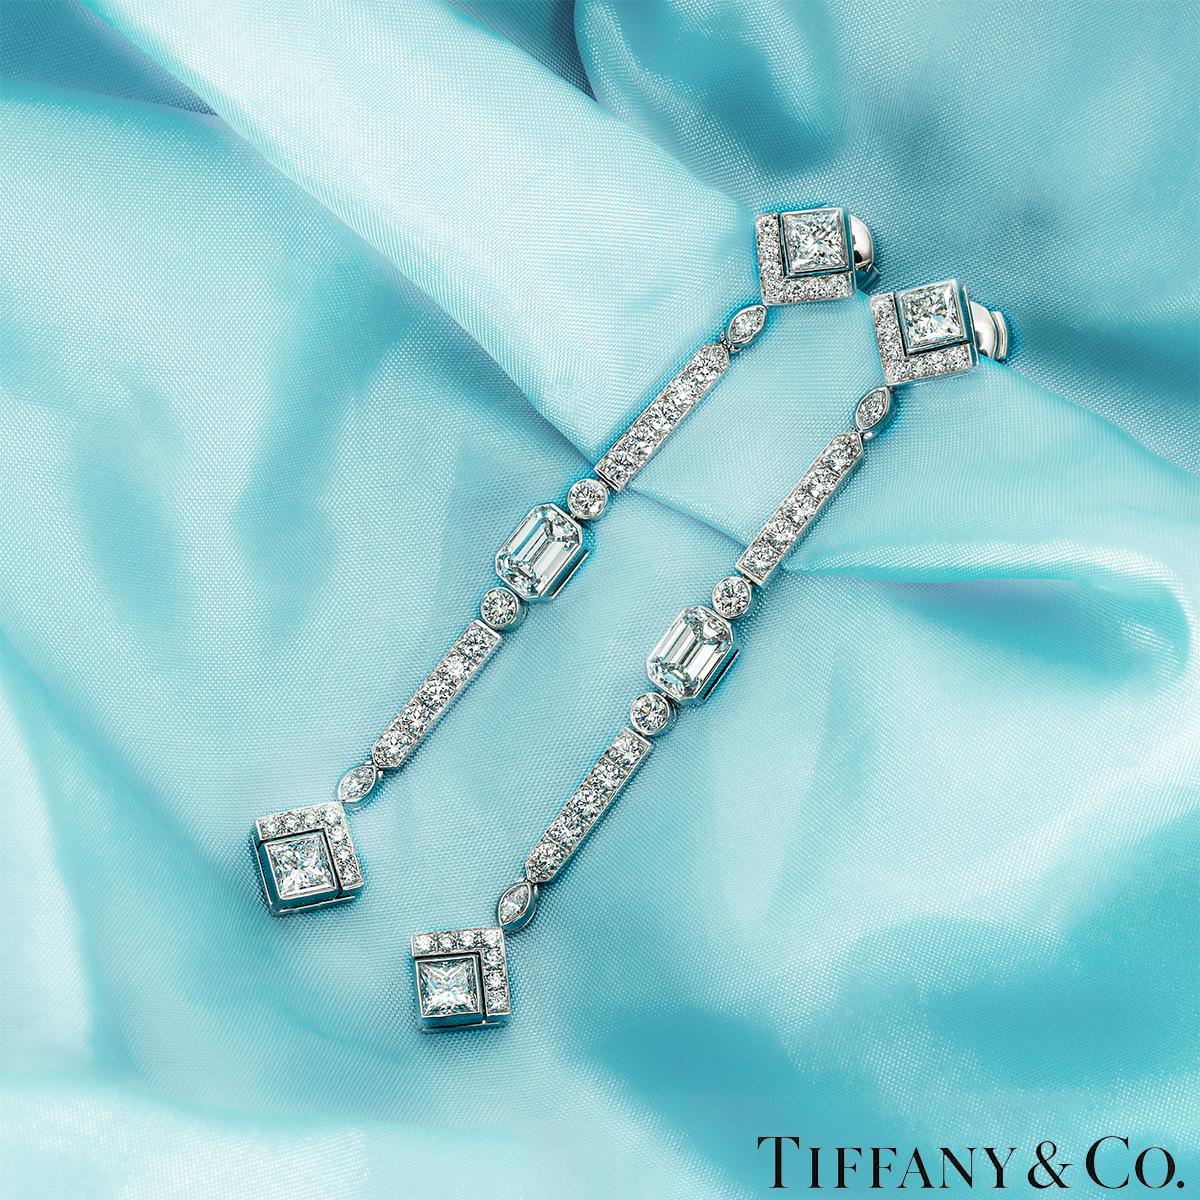 A bespoke pair of platinum diamond drop earrings by Tiffany & Co. Both earrings start with a square cut diamond encased at the bottom by 7 round brilliant cut diamonds, followed by a bezel set marquise cut diamond and a row of 5 round brilliant cut